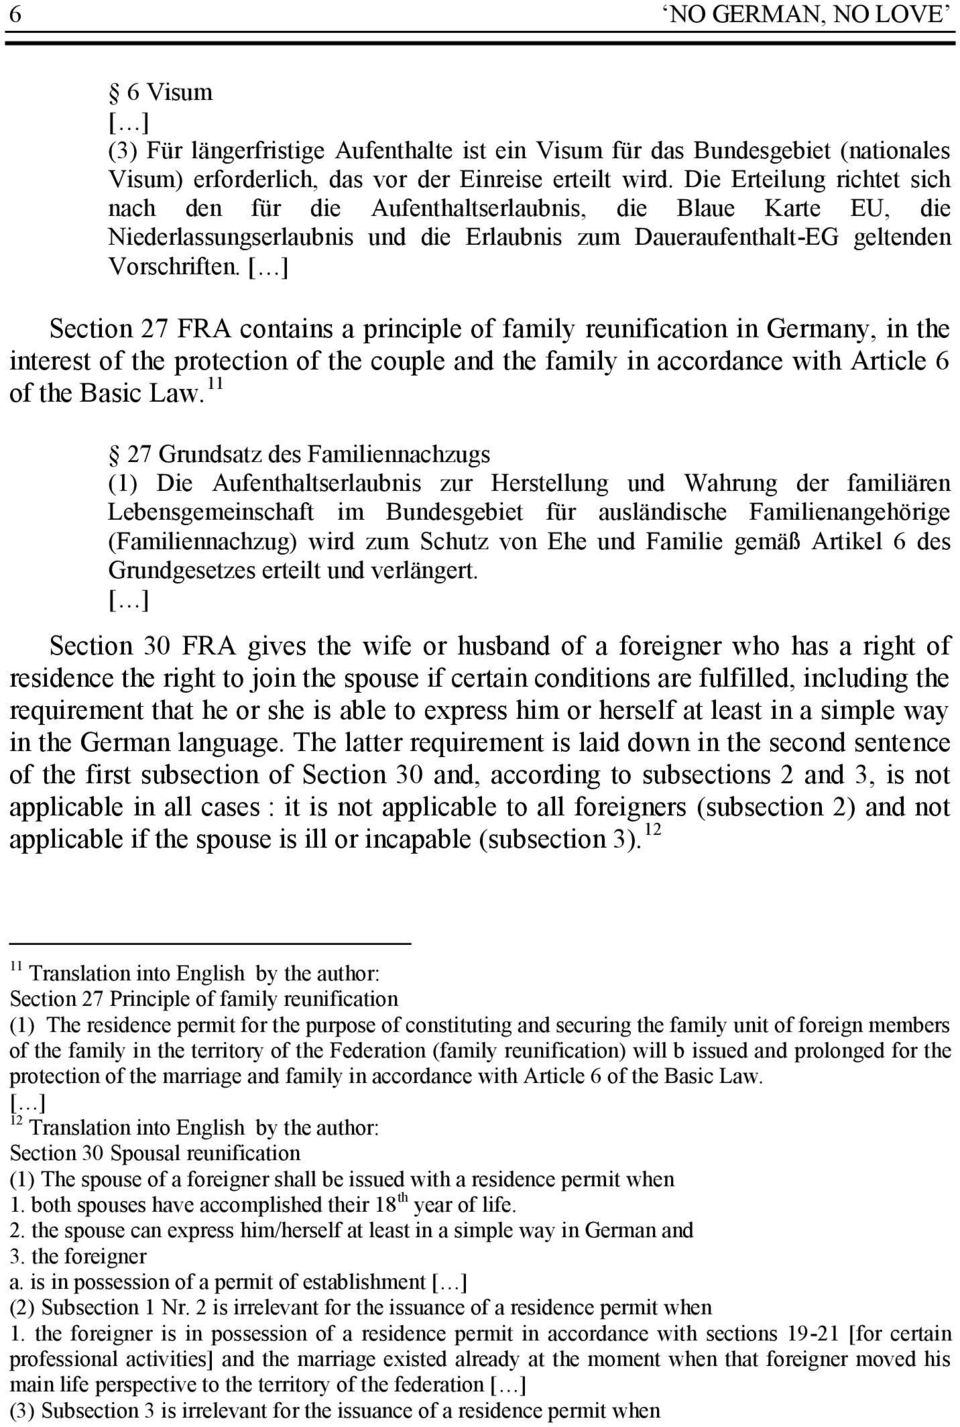 [ ] Section 27 FRA contains a principle of family reunification in Germany, in the interest of the protection of the couple and the family in accordance with Article 6 of the Basic Law.